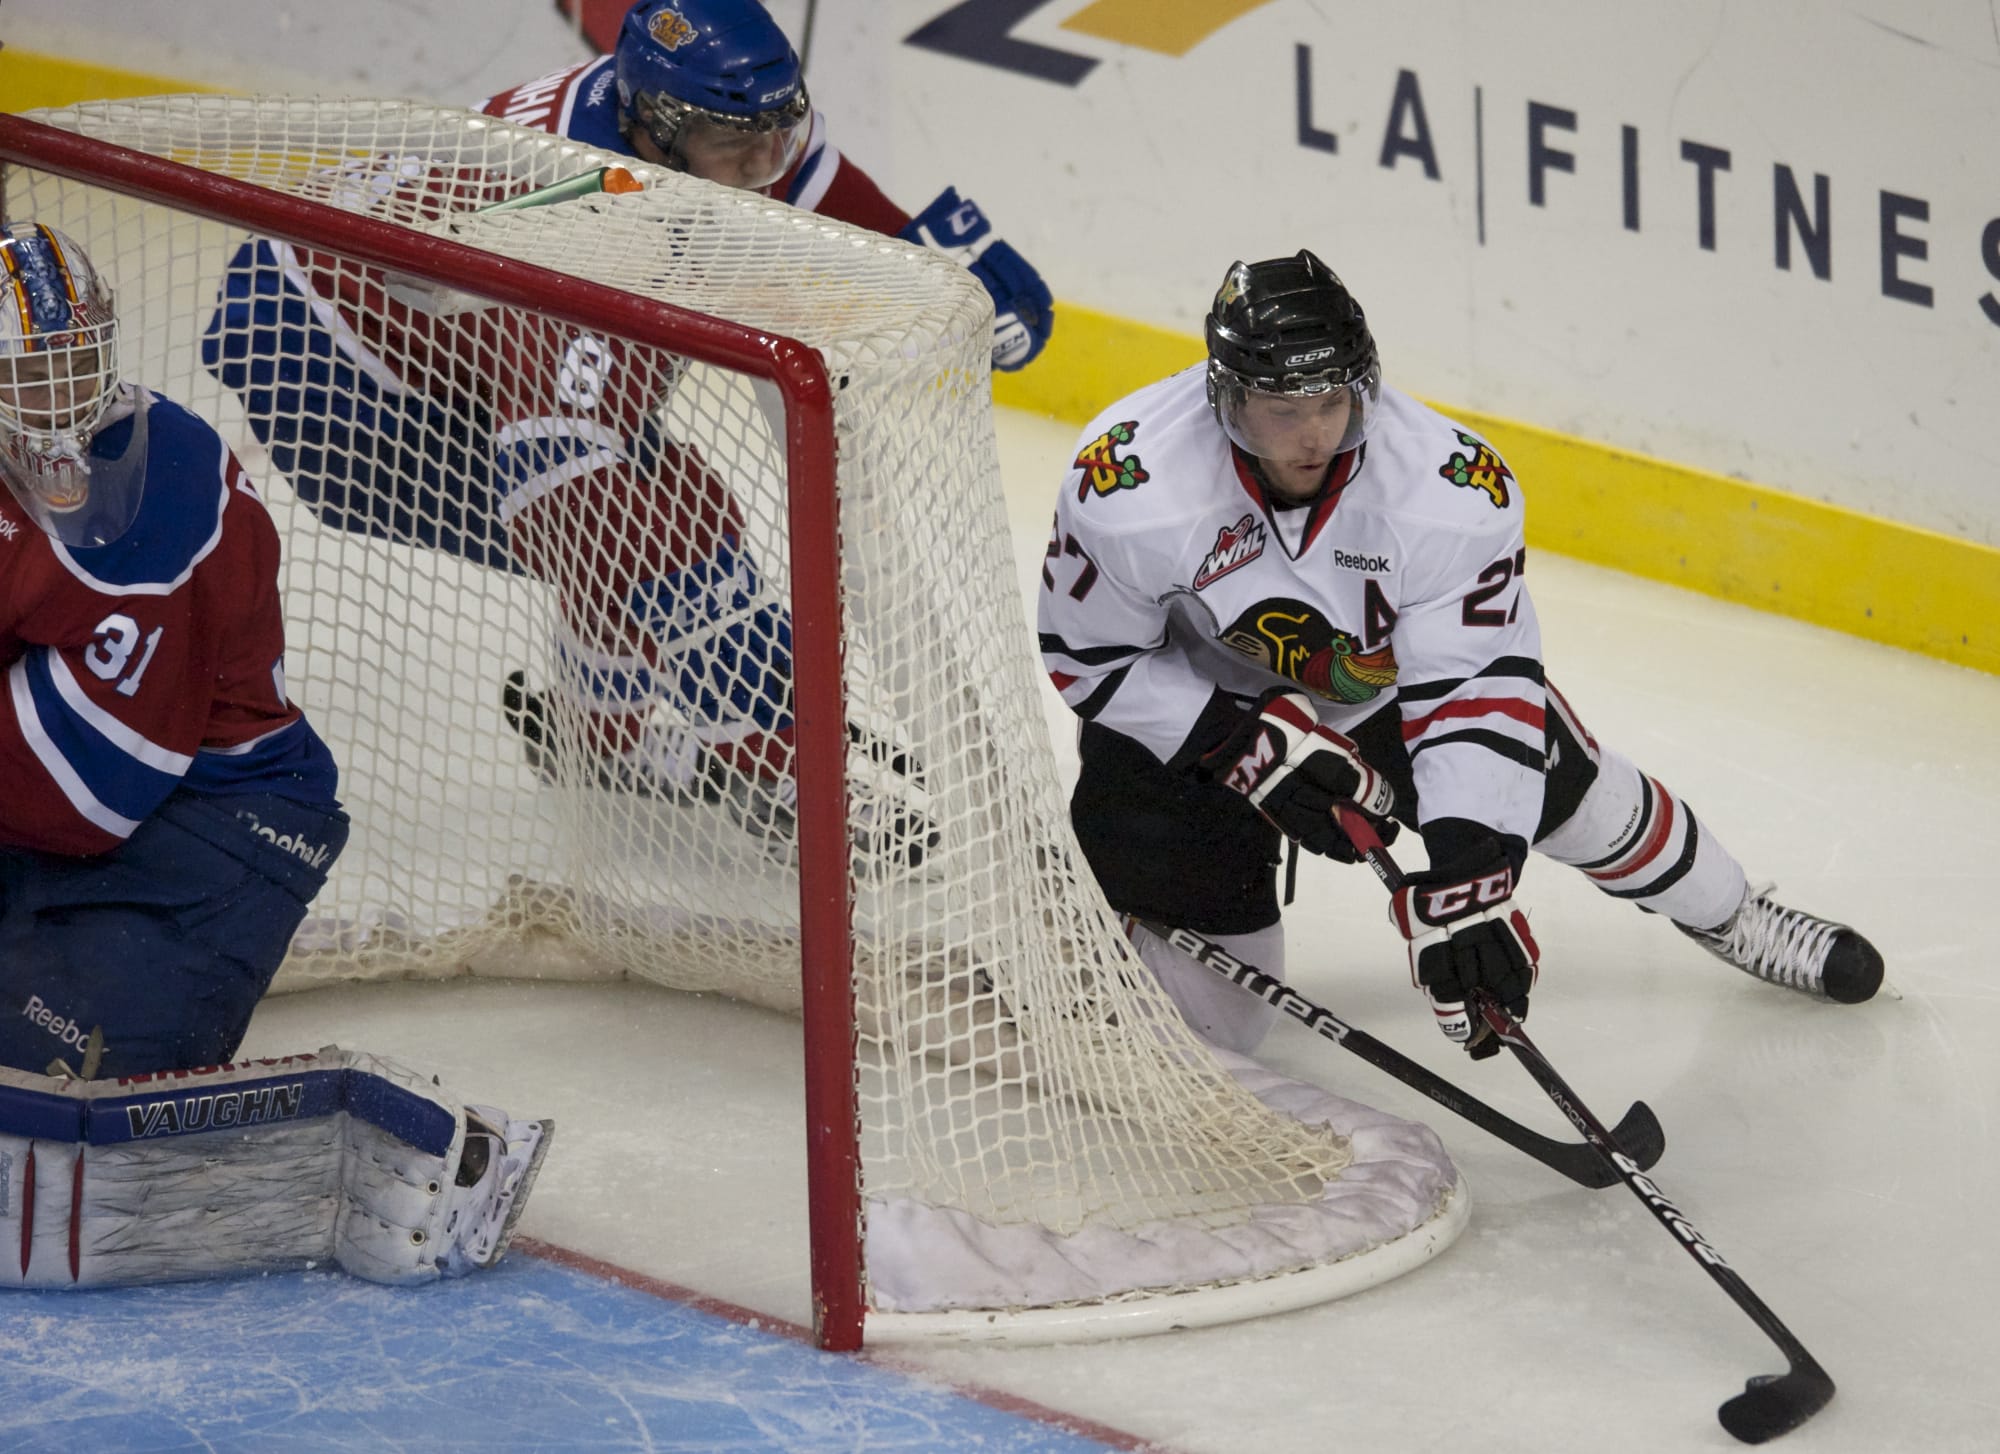 Portland Winterhawks left wing Sven Bartschi could not score on this wrap-around attempt in Game 6 of the Western Hockey League finals against Edmonton, but led all WHL scorers in the playoffs with 34 points.